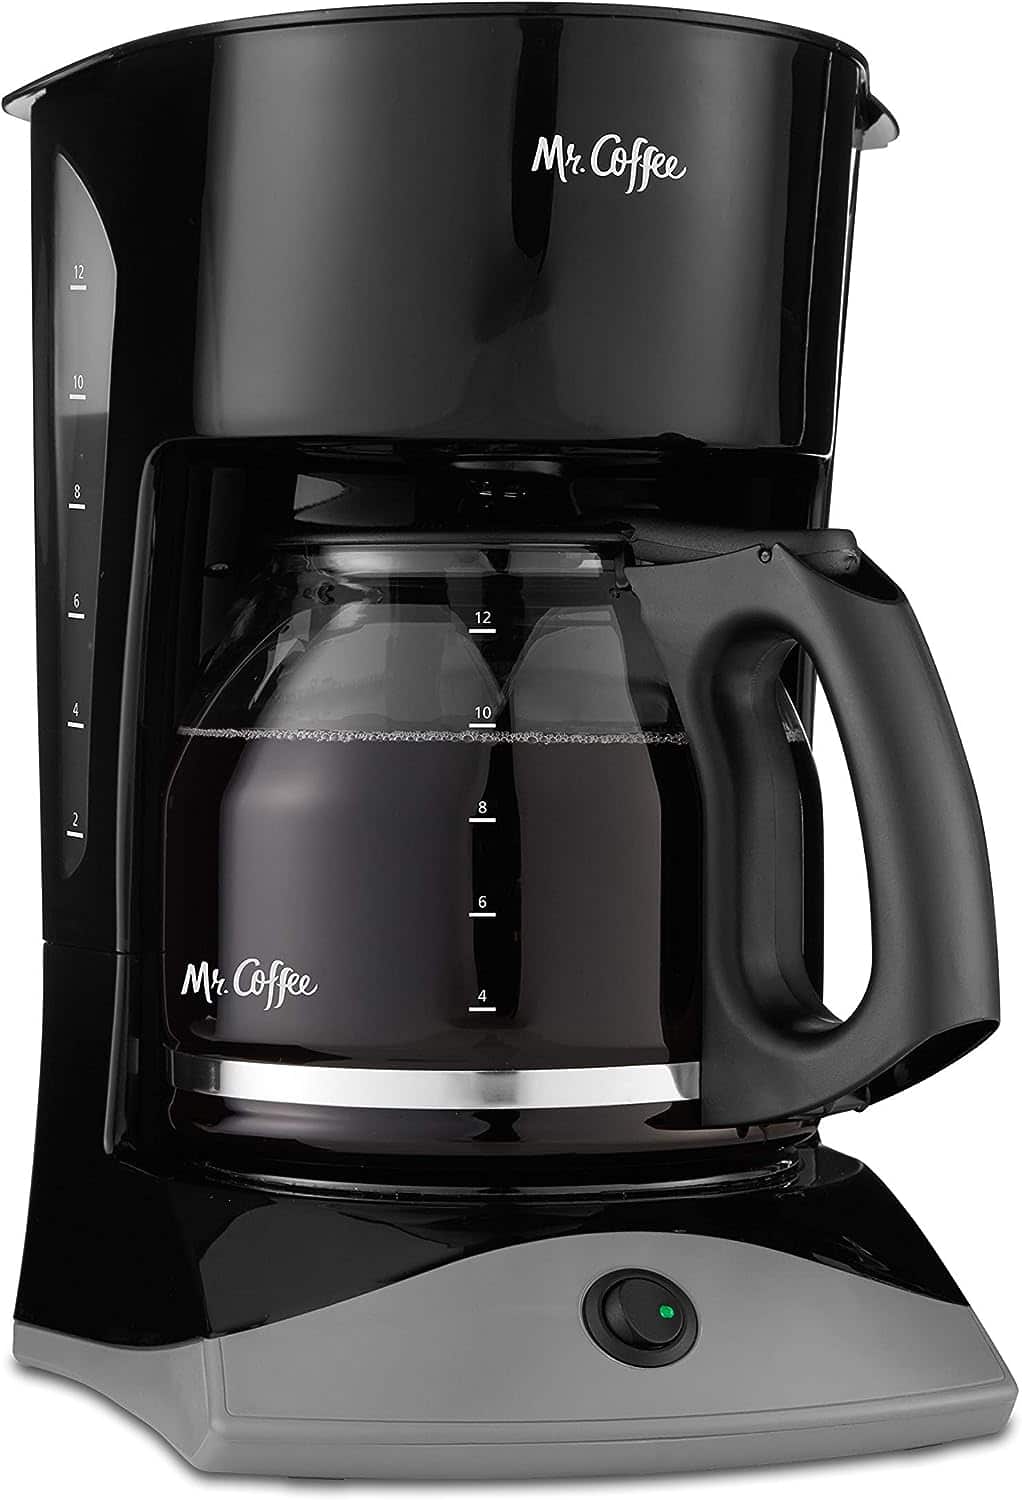 Mr. Coffee Coffee Maker with Auto Pause and Glass Carafe, 12 Cups, Black – A Comprehensive Review